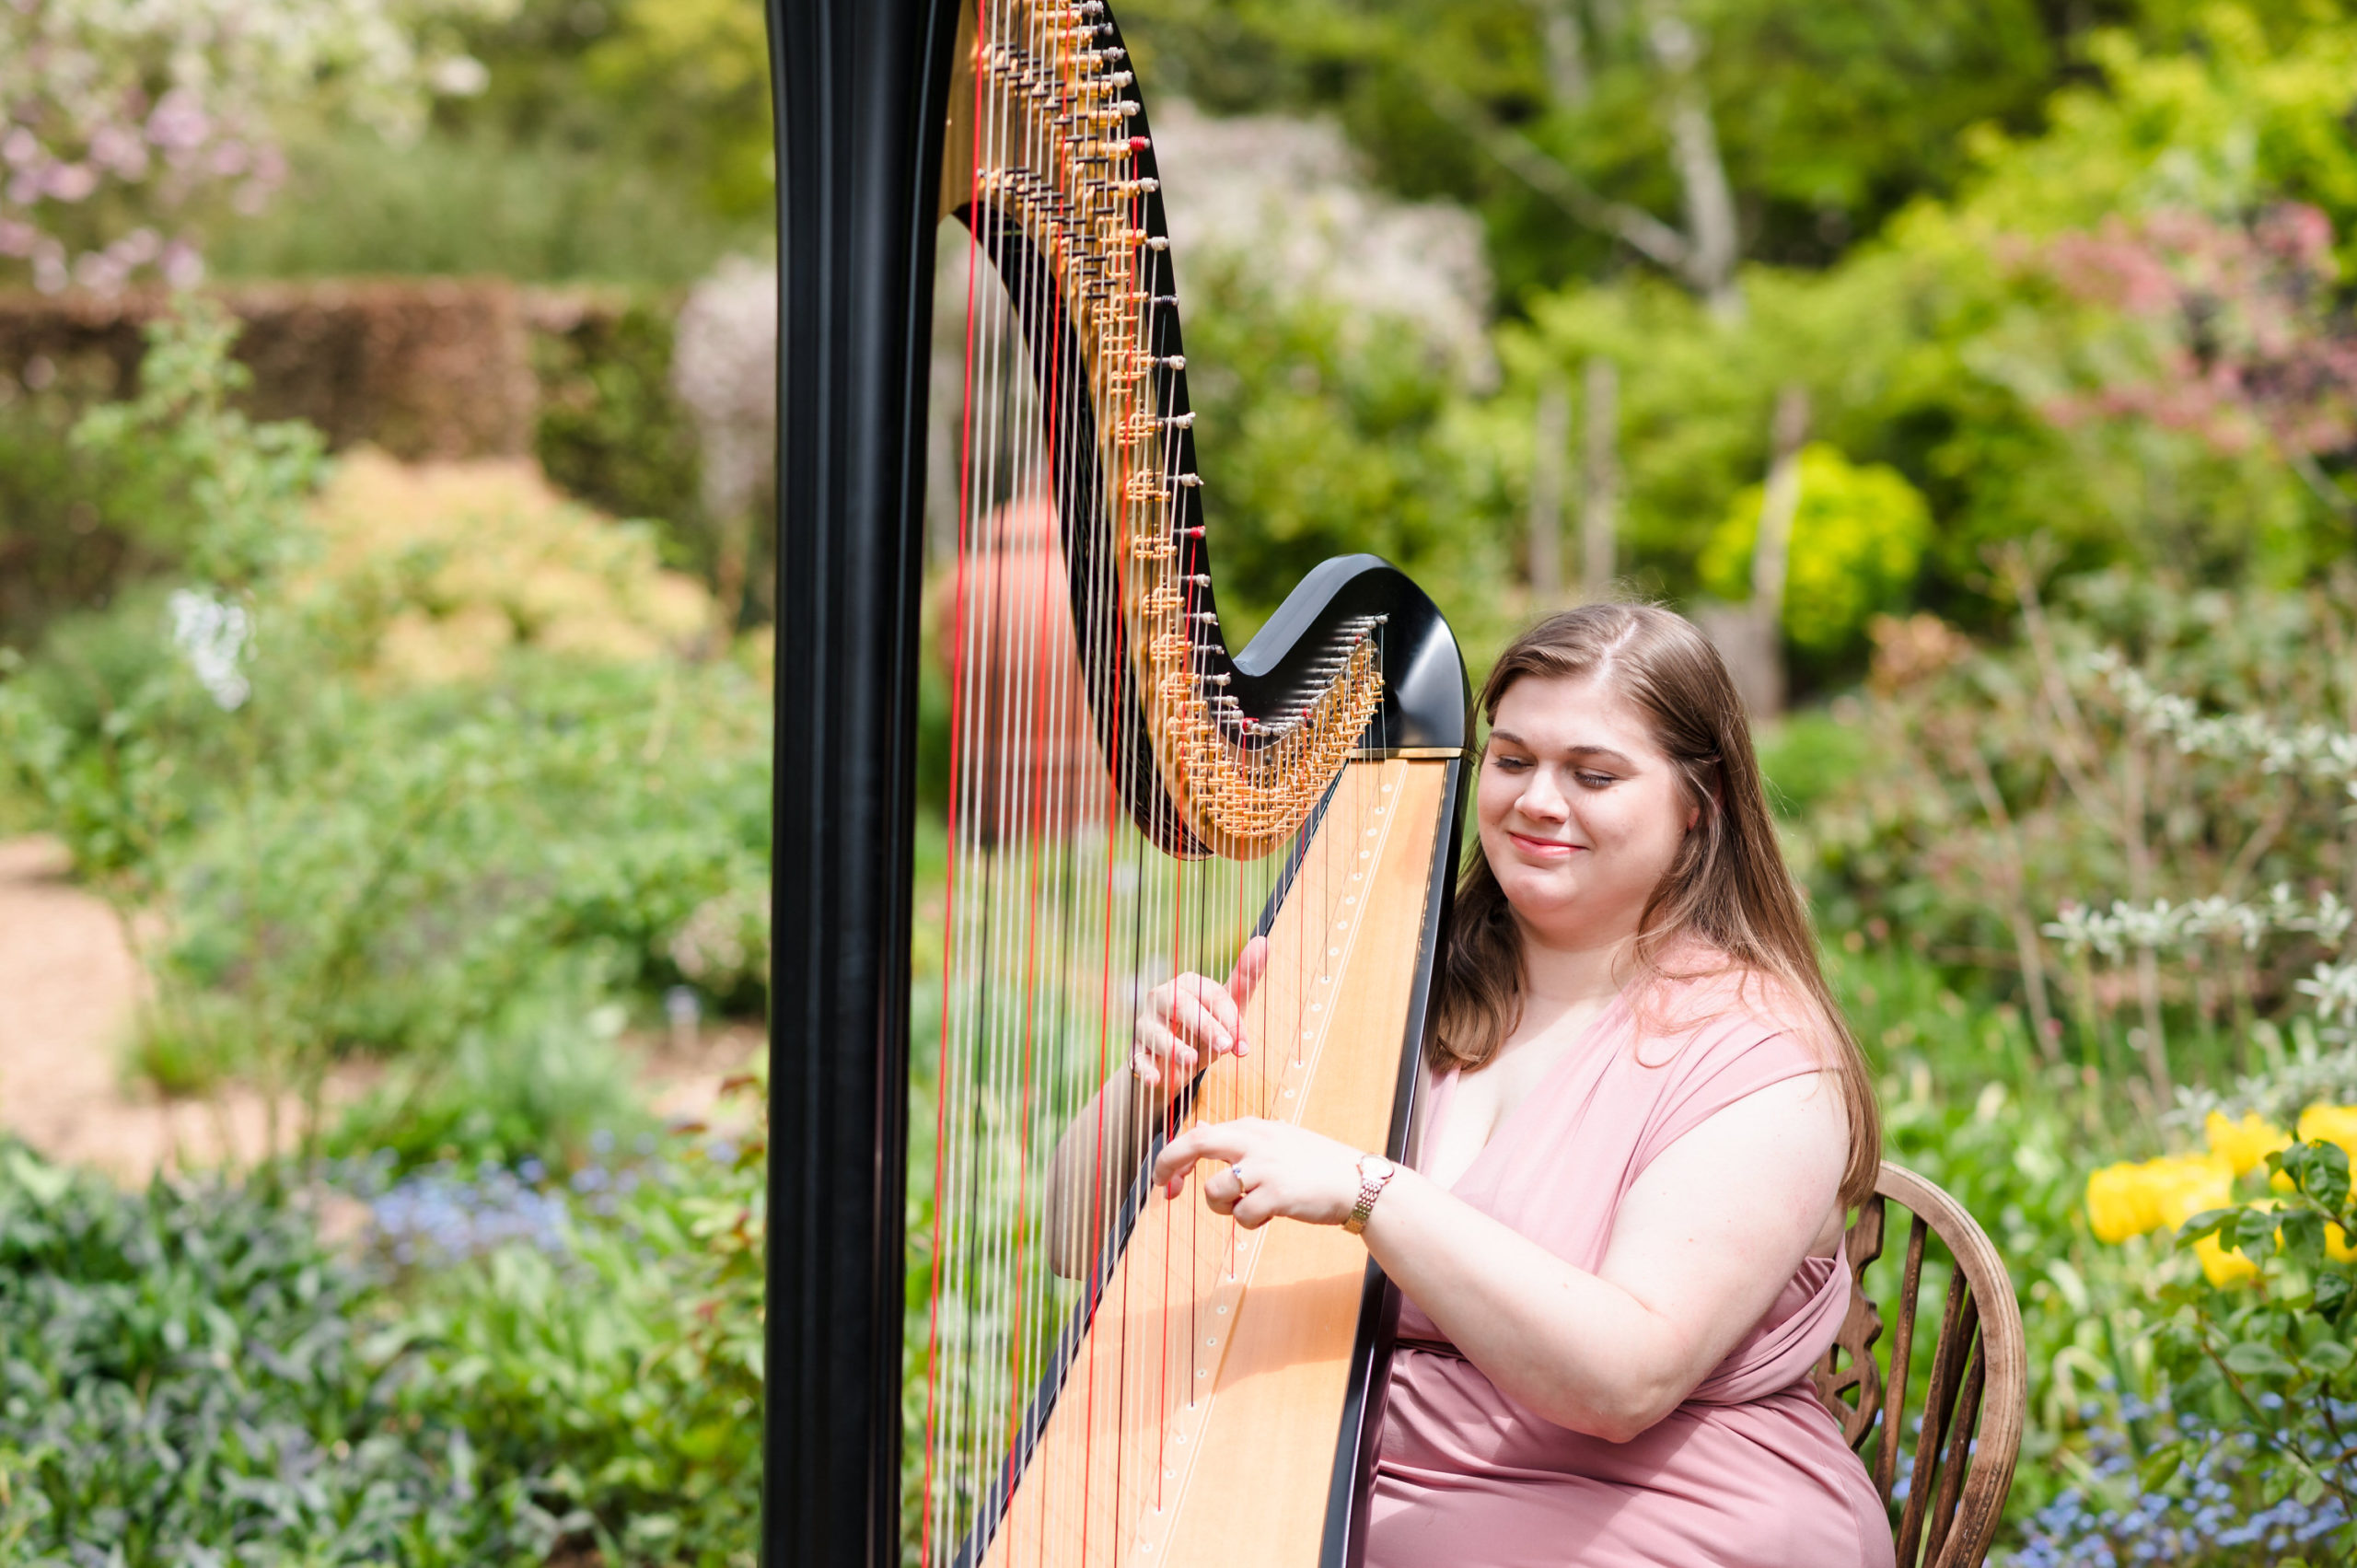 Harriet Flather playing the harp at Barnsdale Gardens Rutland